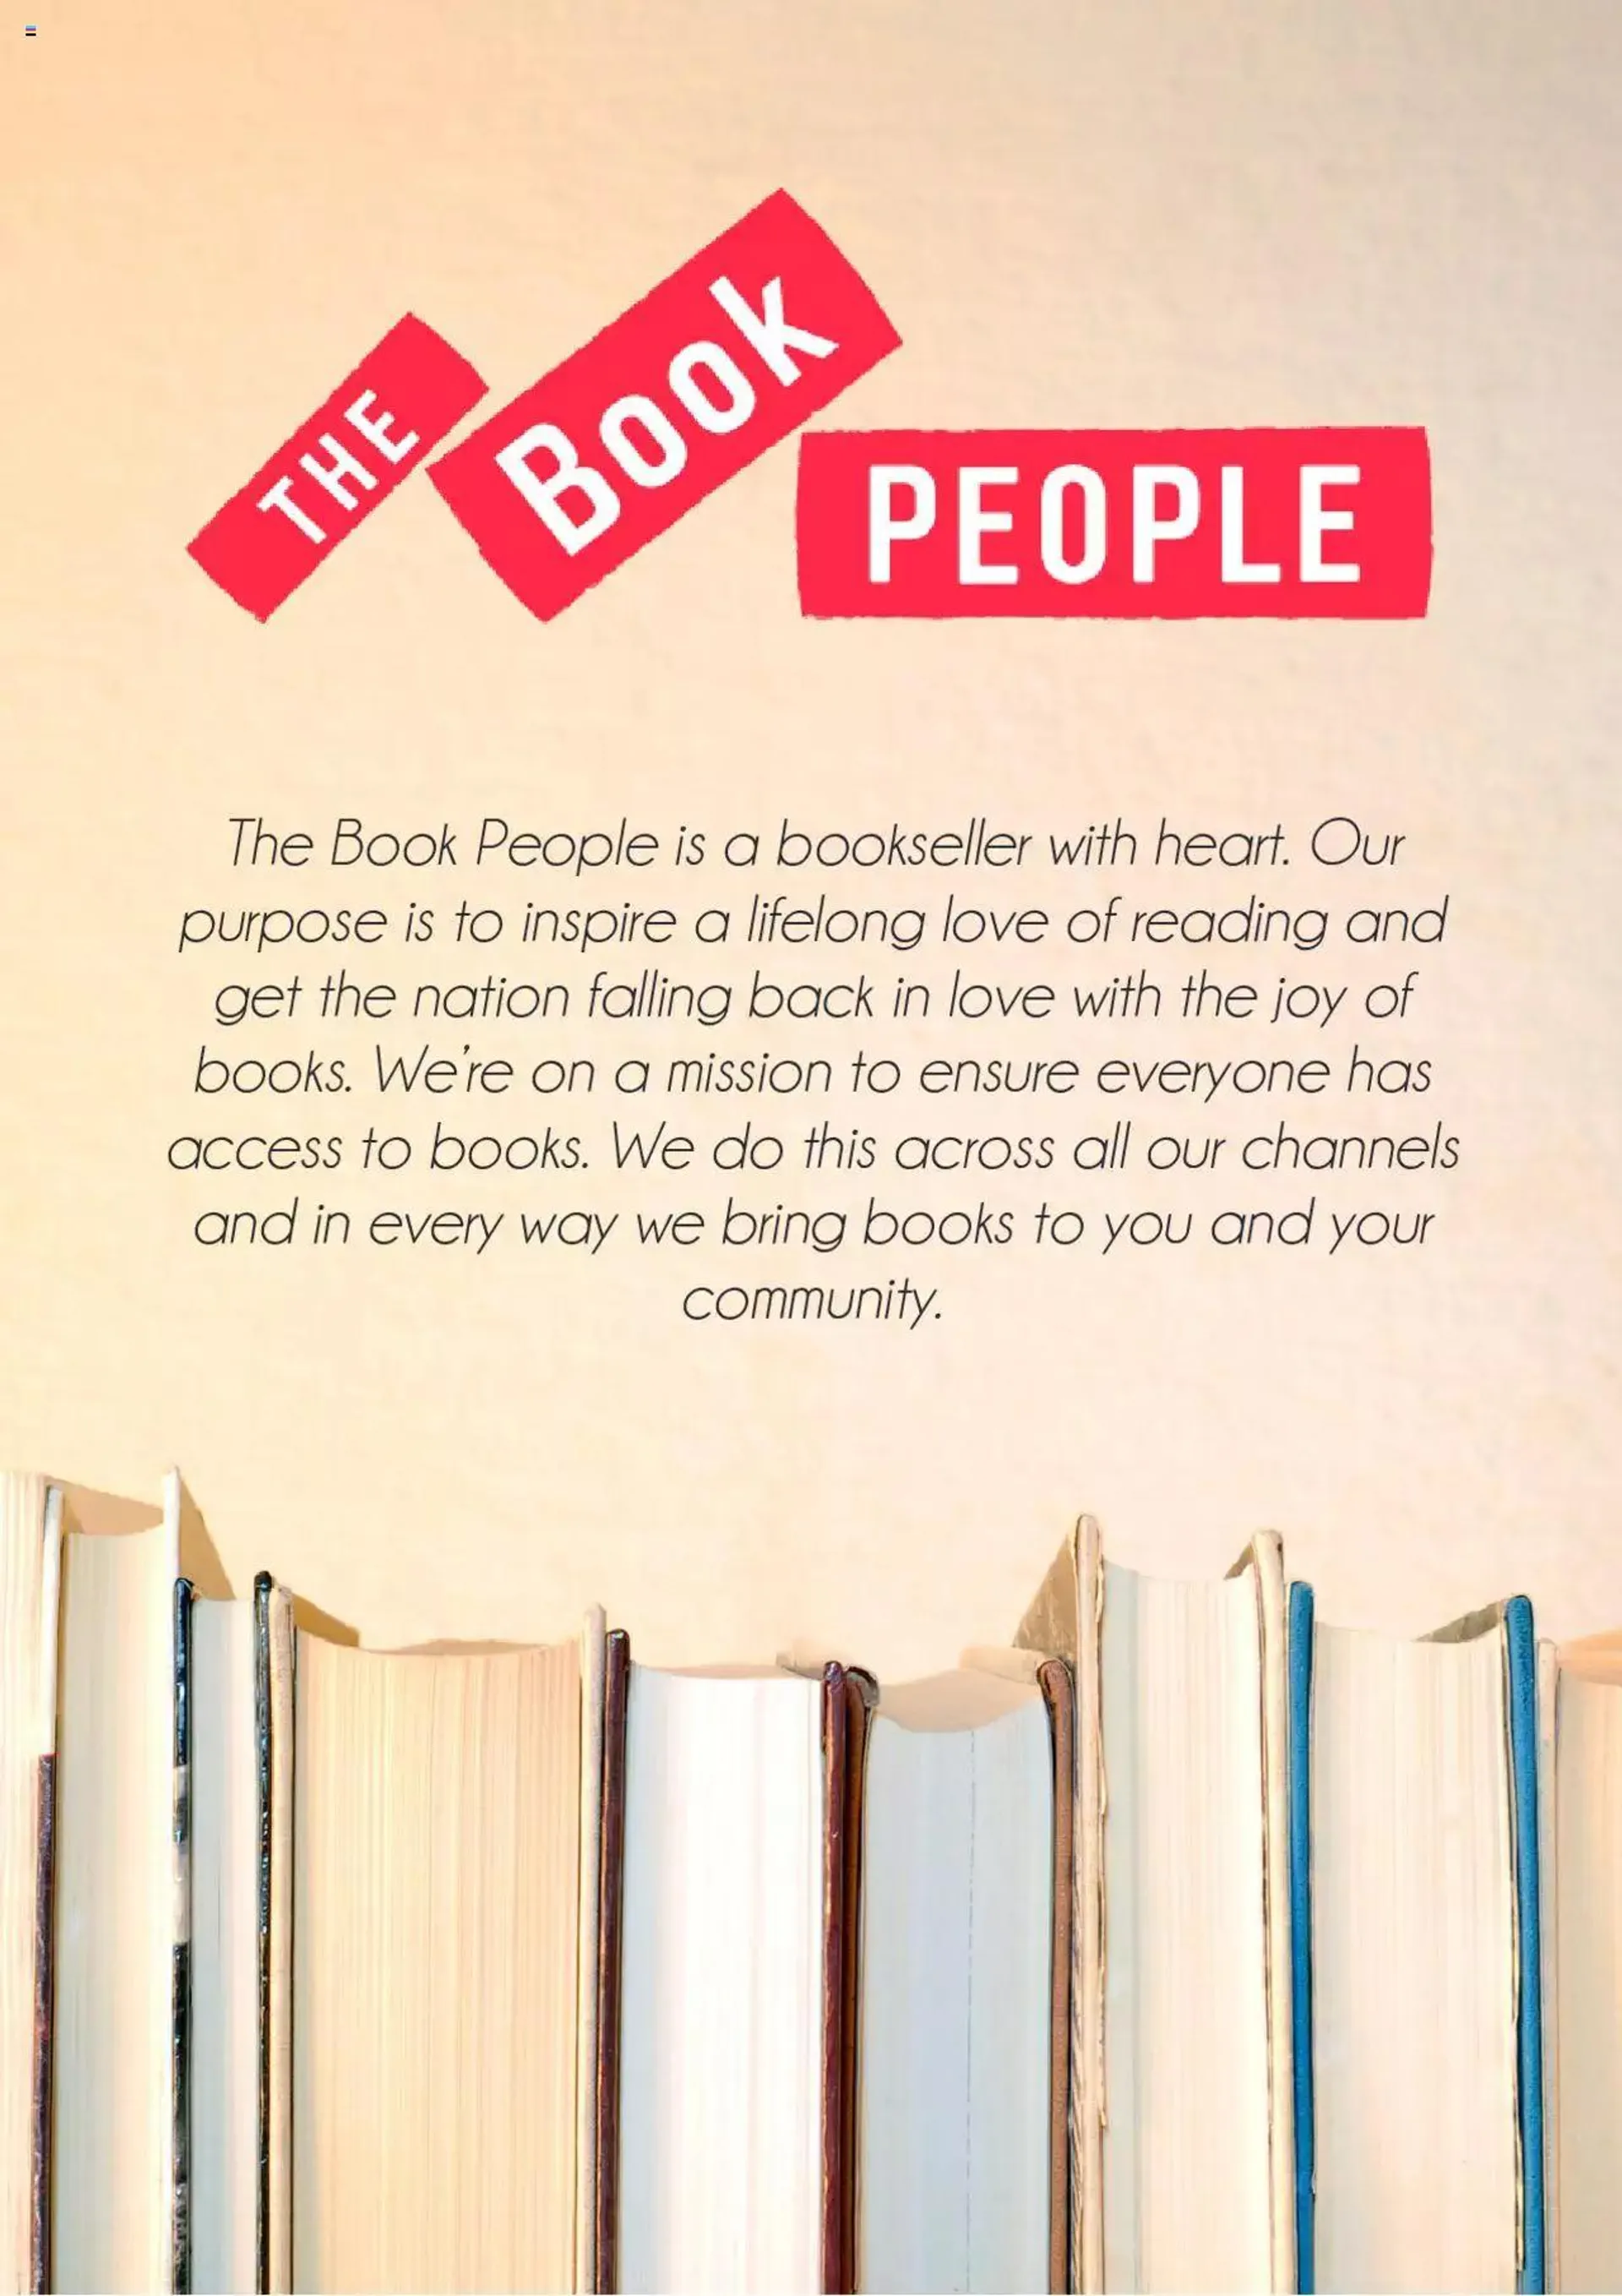 The Book People offers - 0